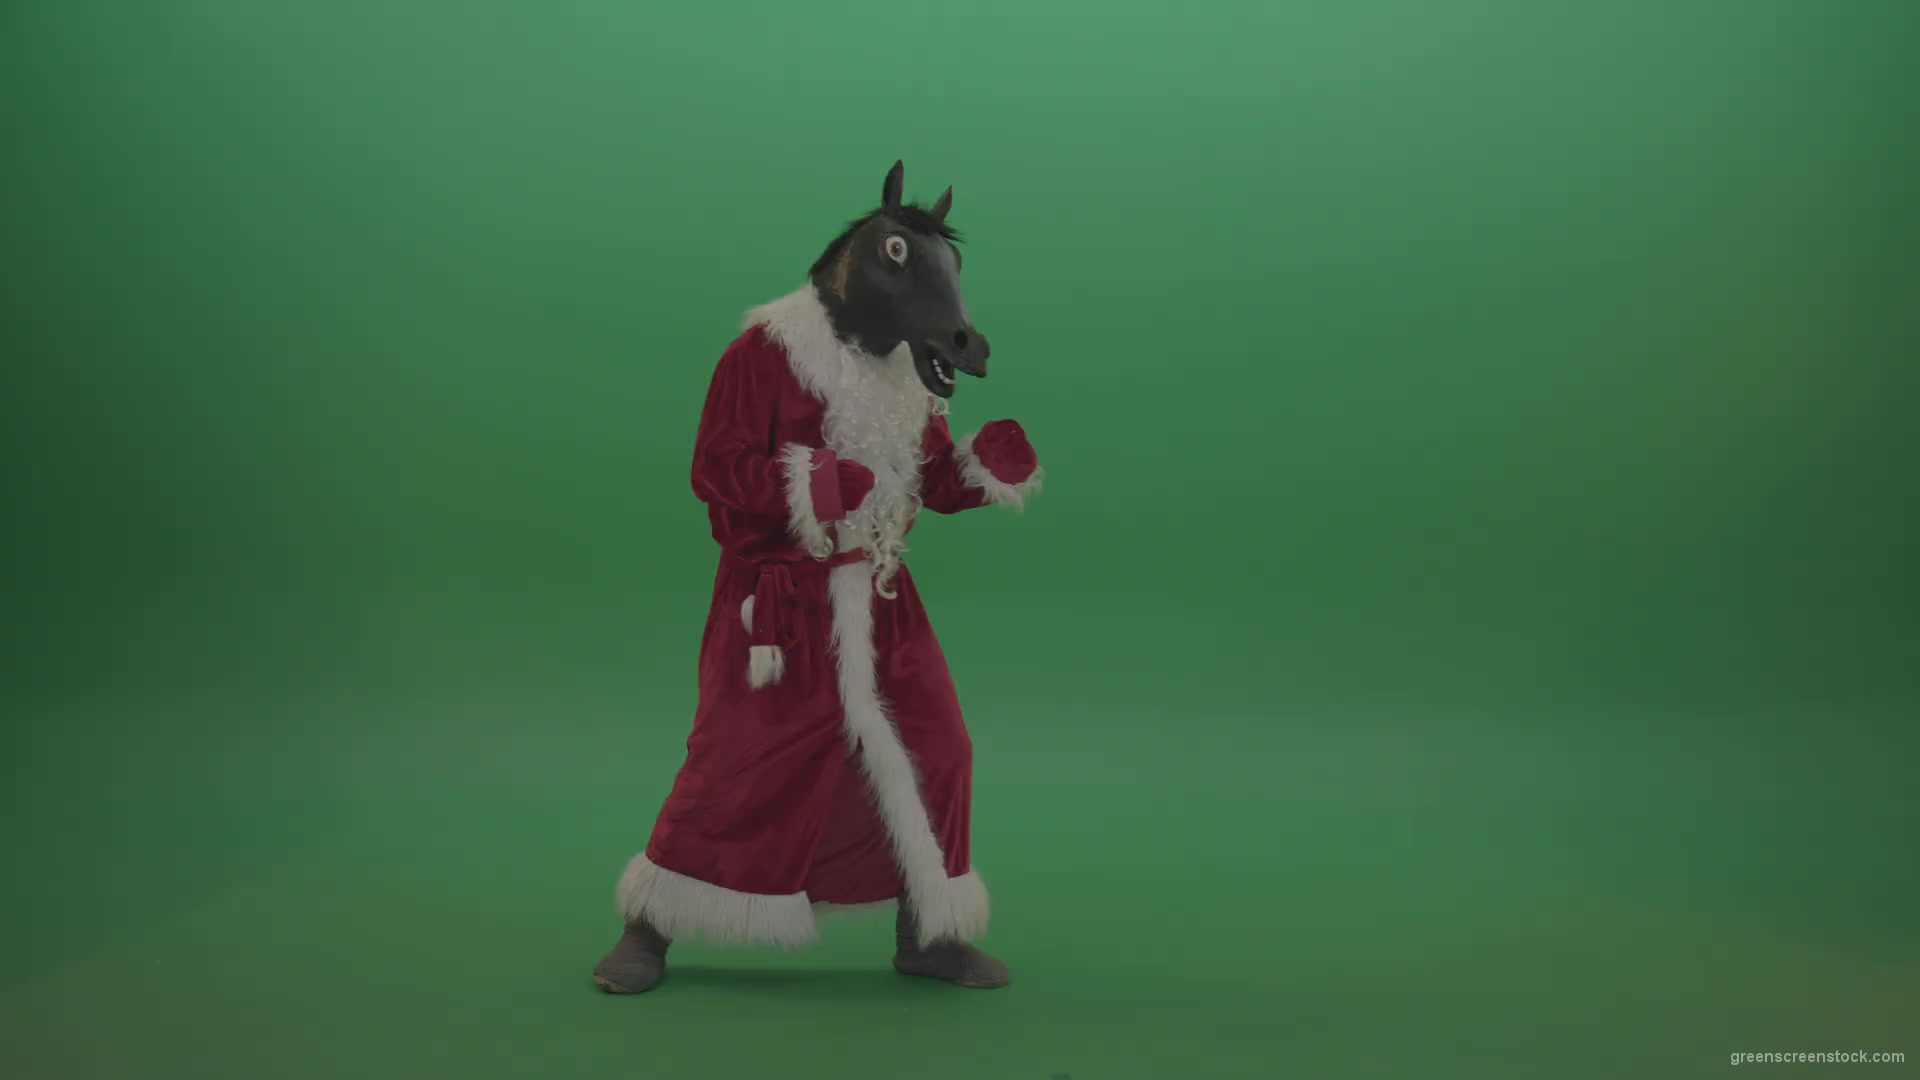 Horse-head-santa-displays-his-fight-techniques-over-chromakey-background-1920_001 Green Screen Stock